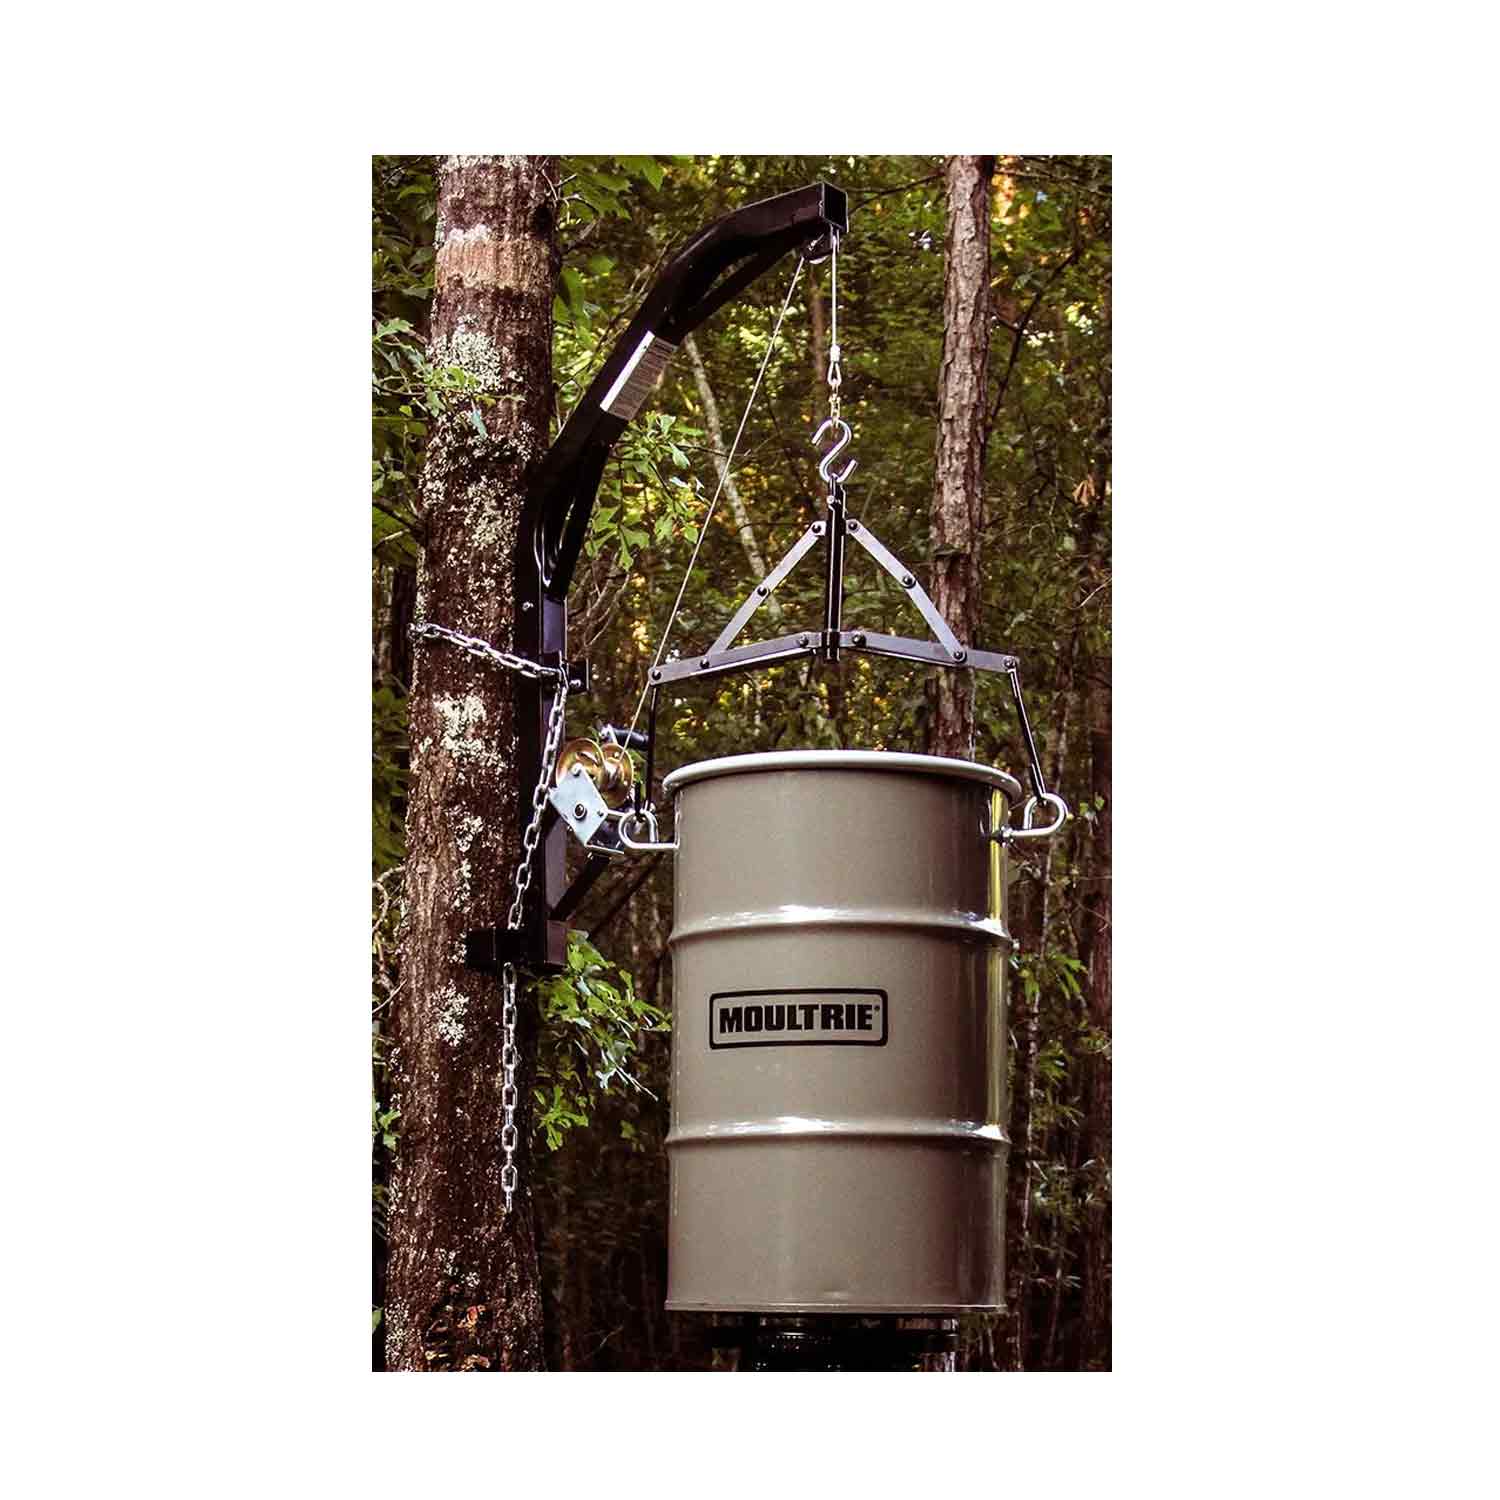 Moultrie Packable Hoist and Gambrel